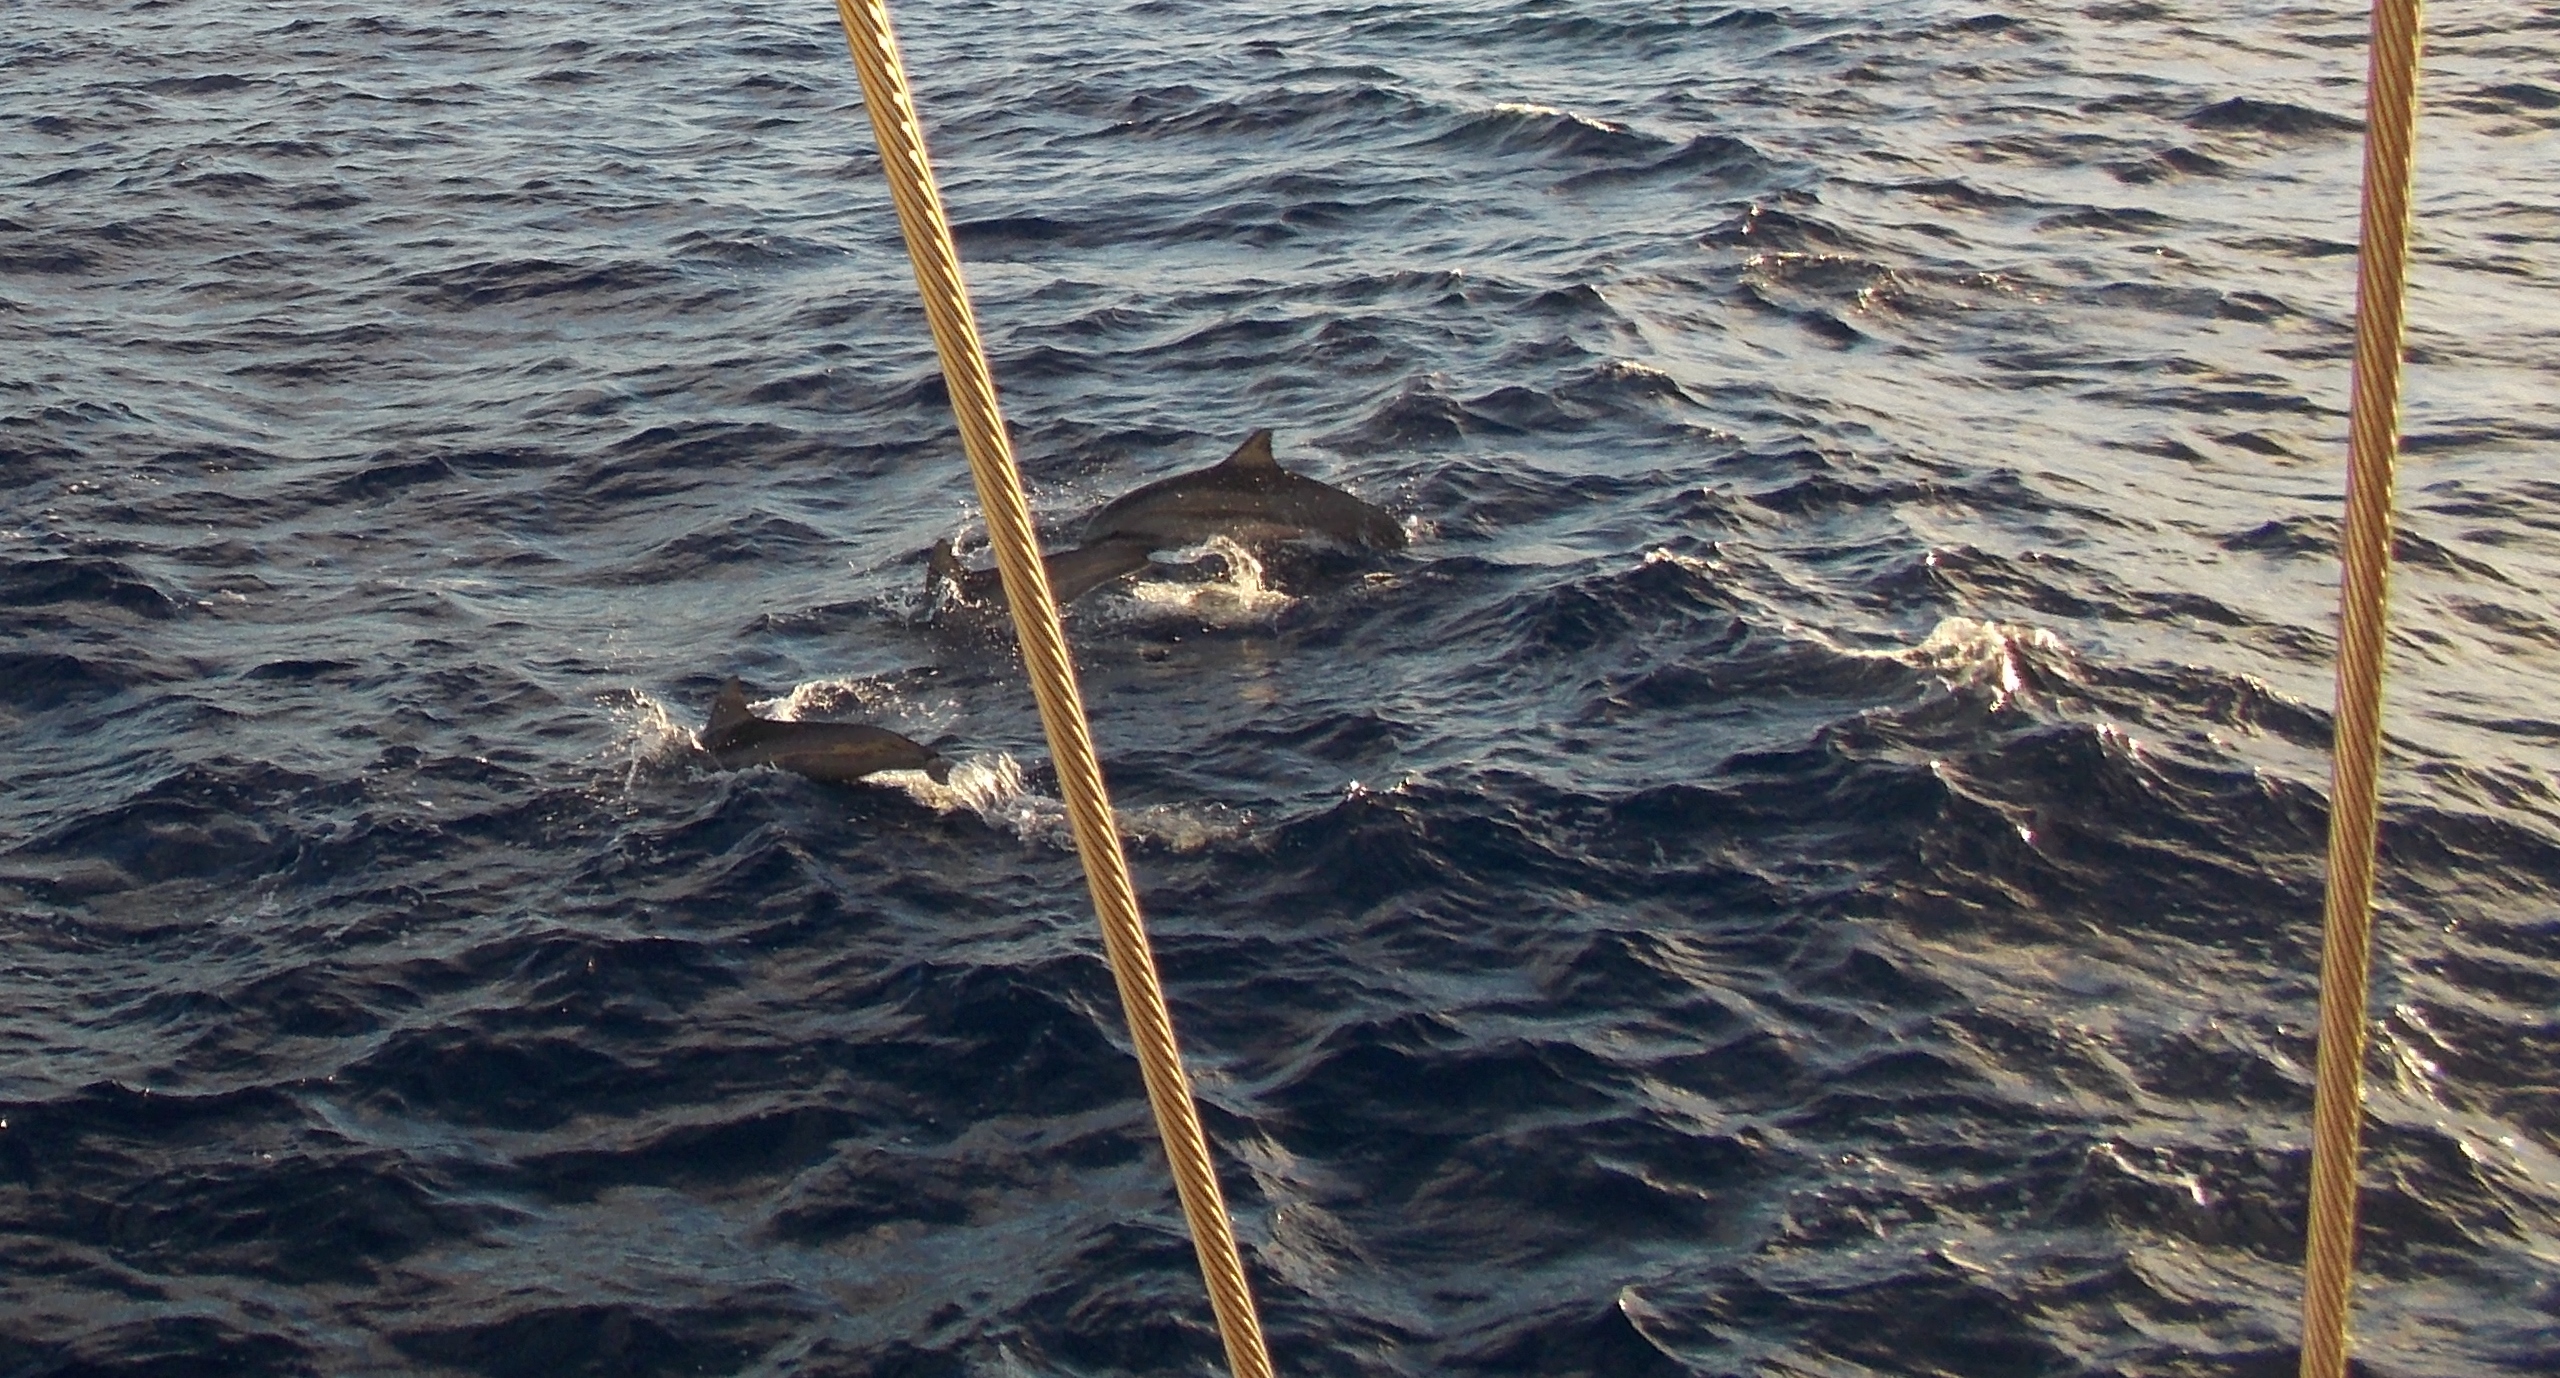 Spinner Dolphins swimming